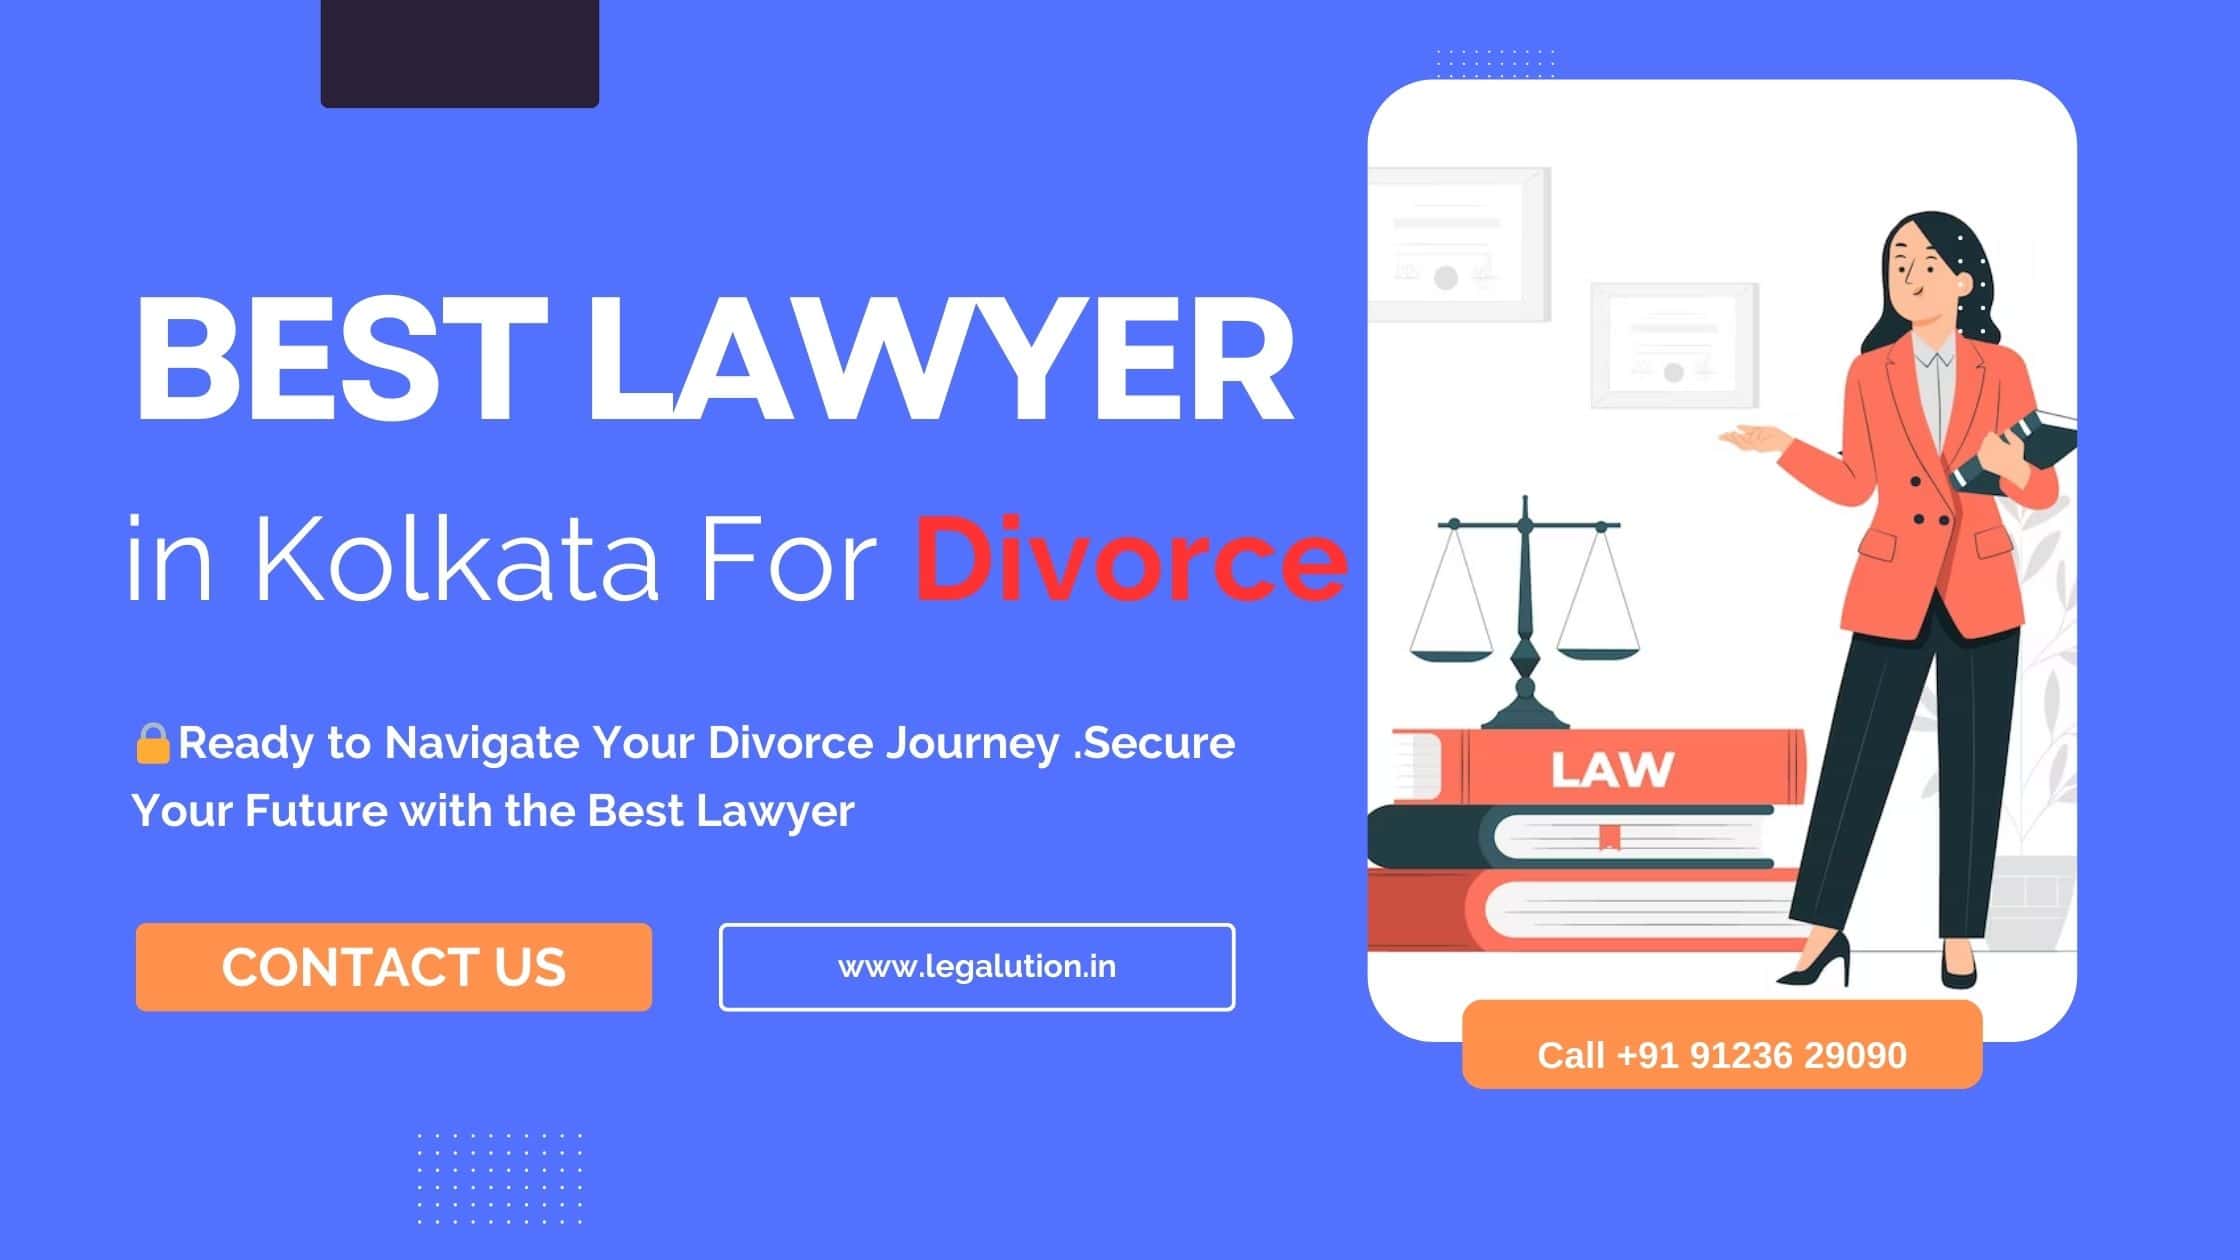 Best Lawyer in Kolkata for Divorce -Hire Expert Lawyer